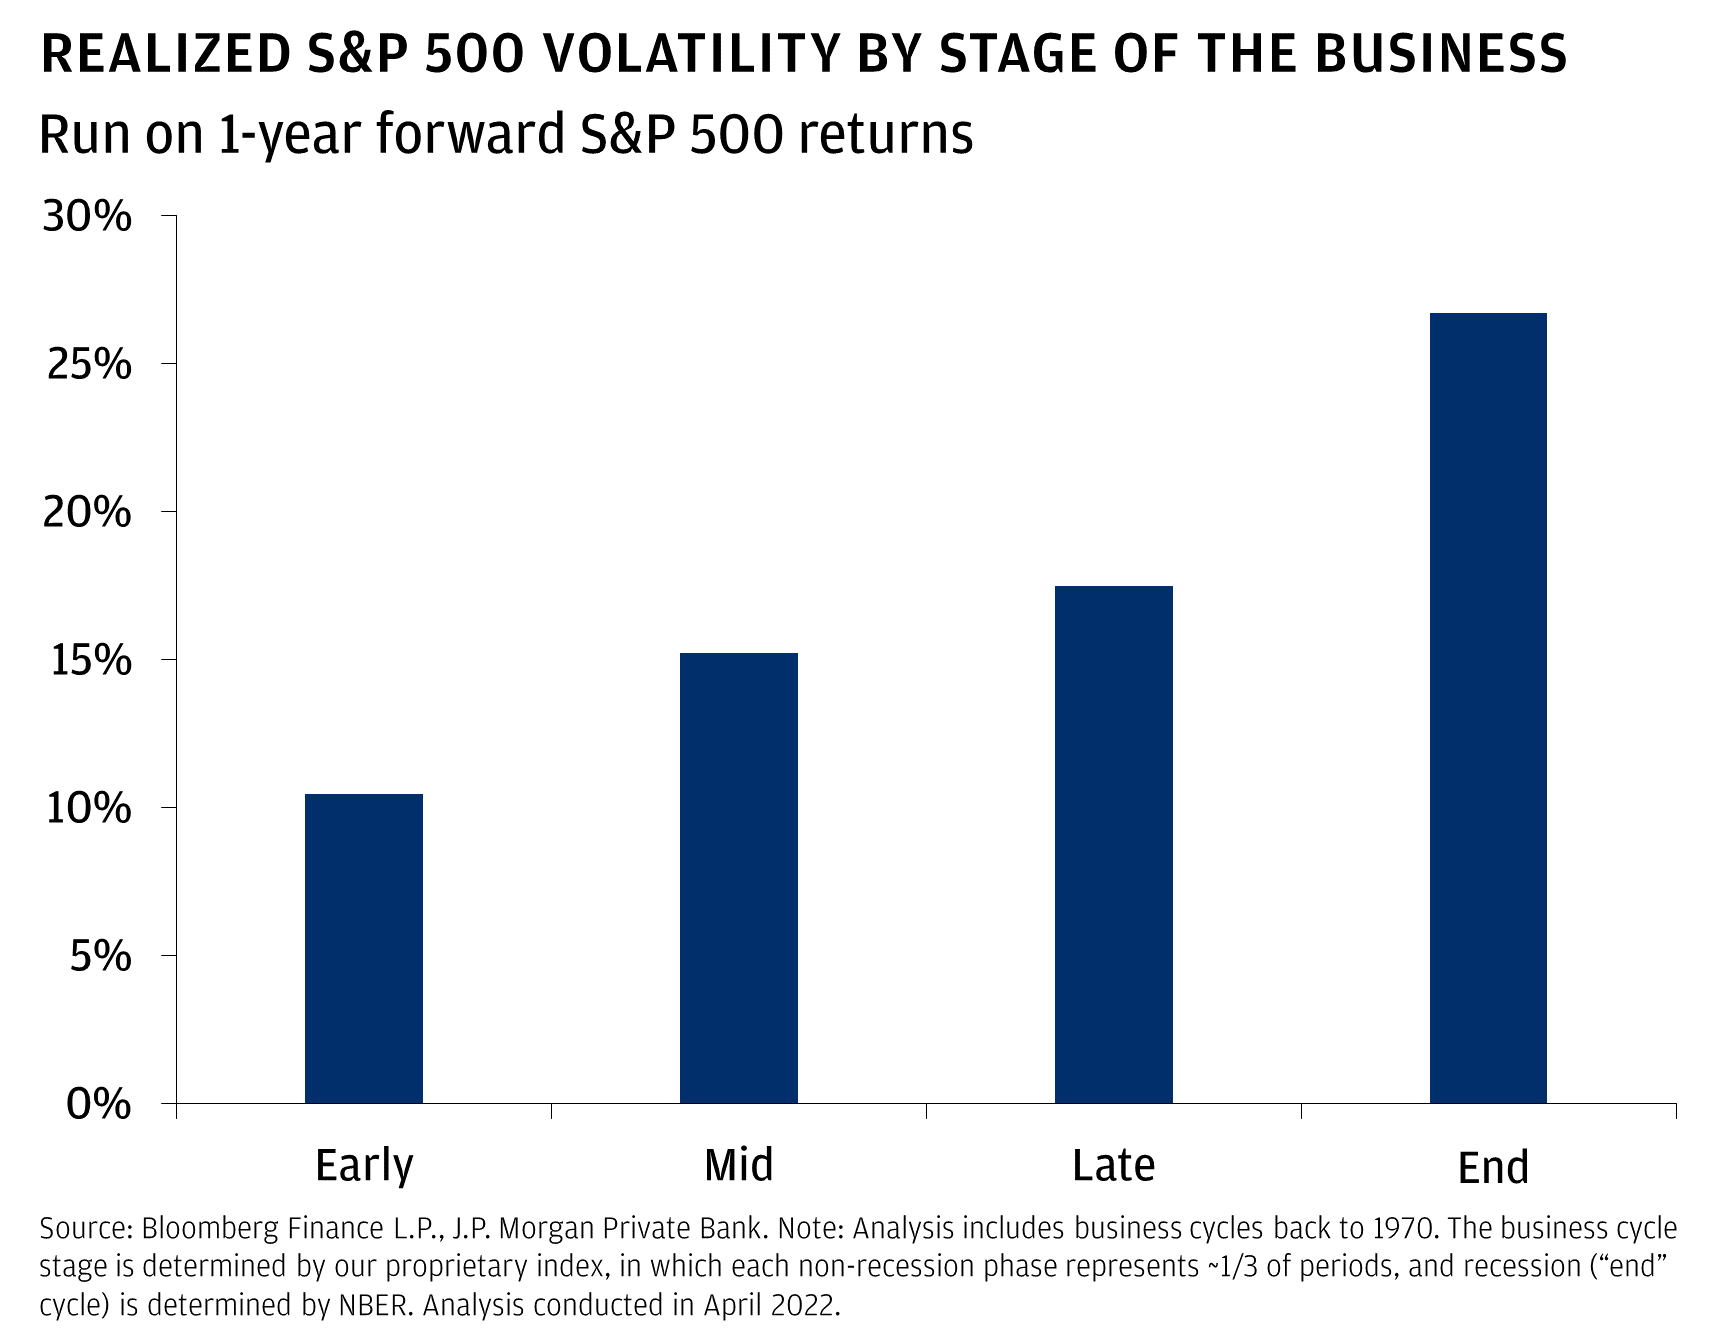 This chart shows the run on 1-year forward SPX returns as a representation of S&P 500 volatility at different stages of the business cycle. It shows that volatility rises throughout the cycle, peaking at 27% in a recession compared to just 10% in early-cycle. The volatility then comes in at 15% in mid-cycle and 17% in late-cycle